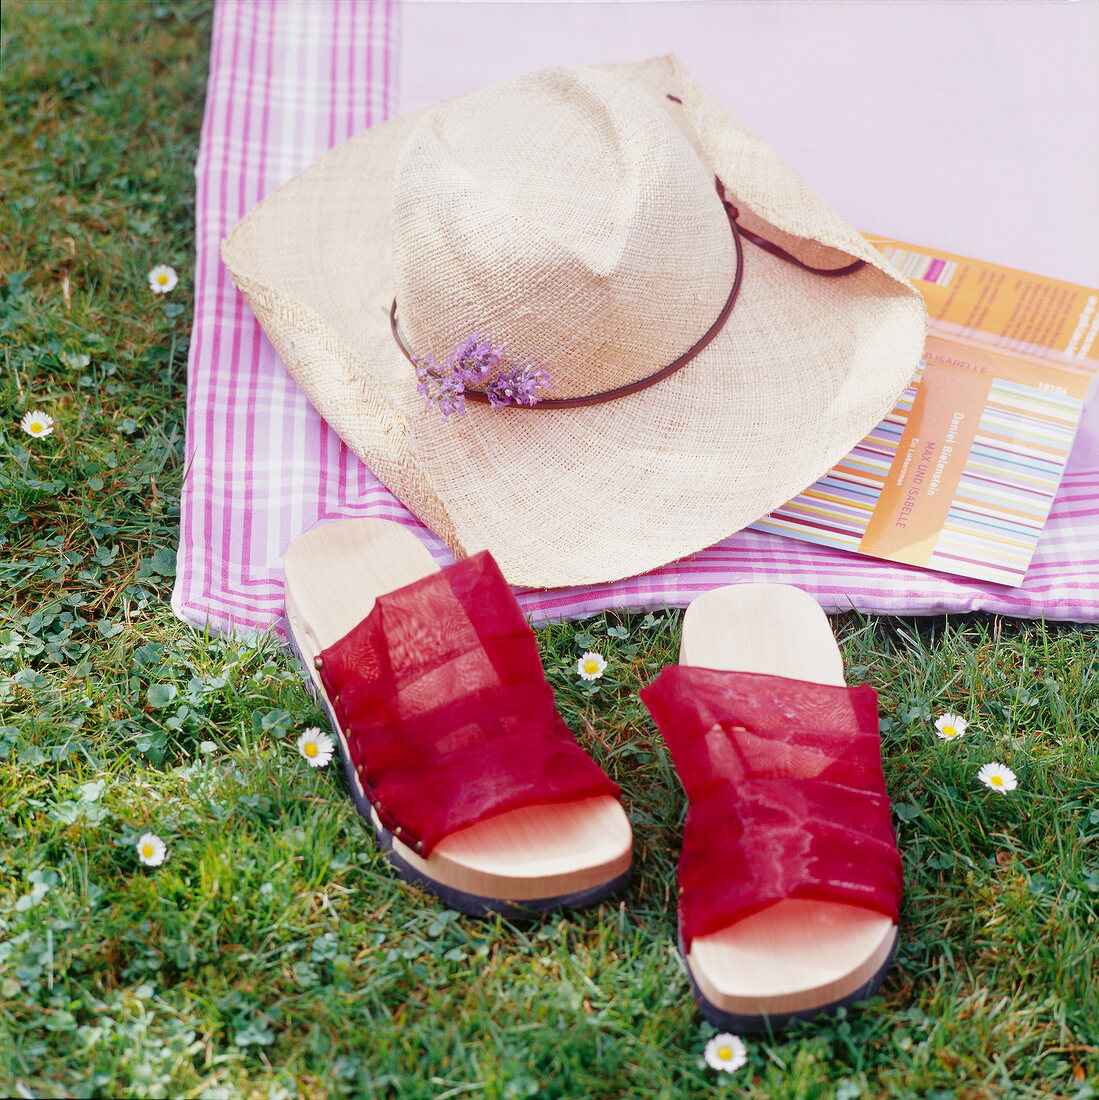 Red sandals, straw hat and book on purple blanket in garden